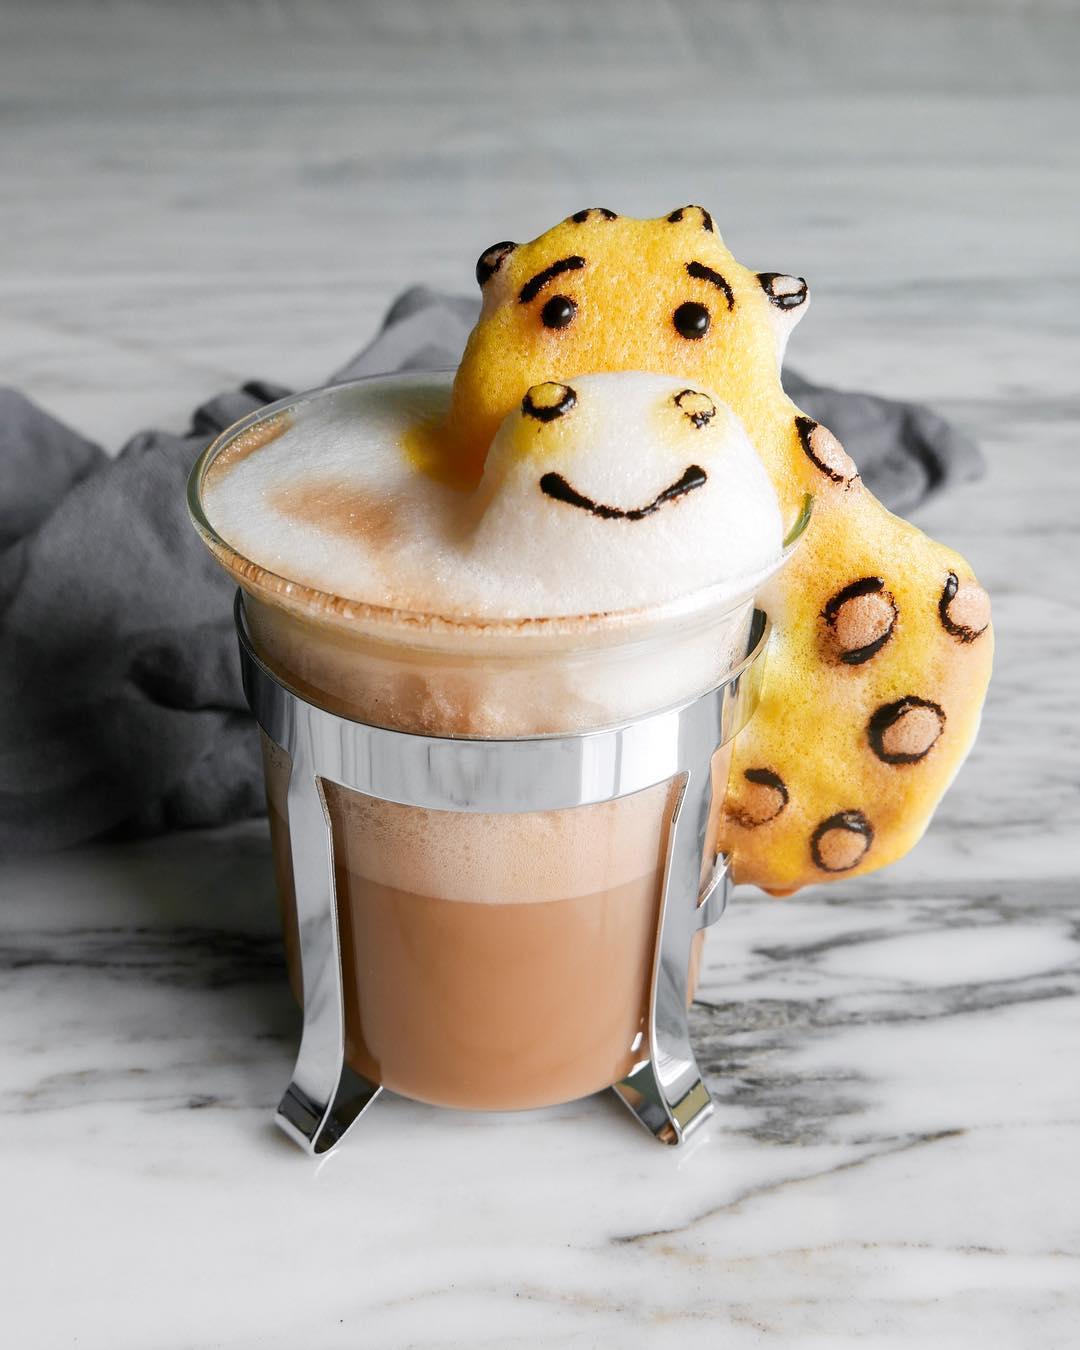 Self-Taught Latte Artist Daphne Tan Whips Up Adorable 3D Coffee Art